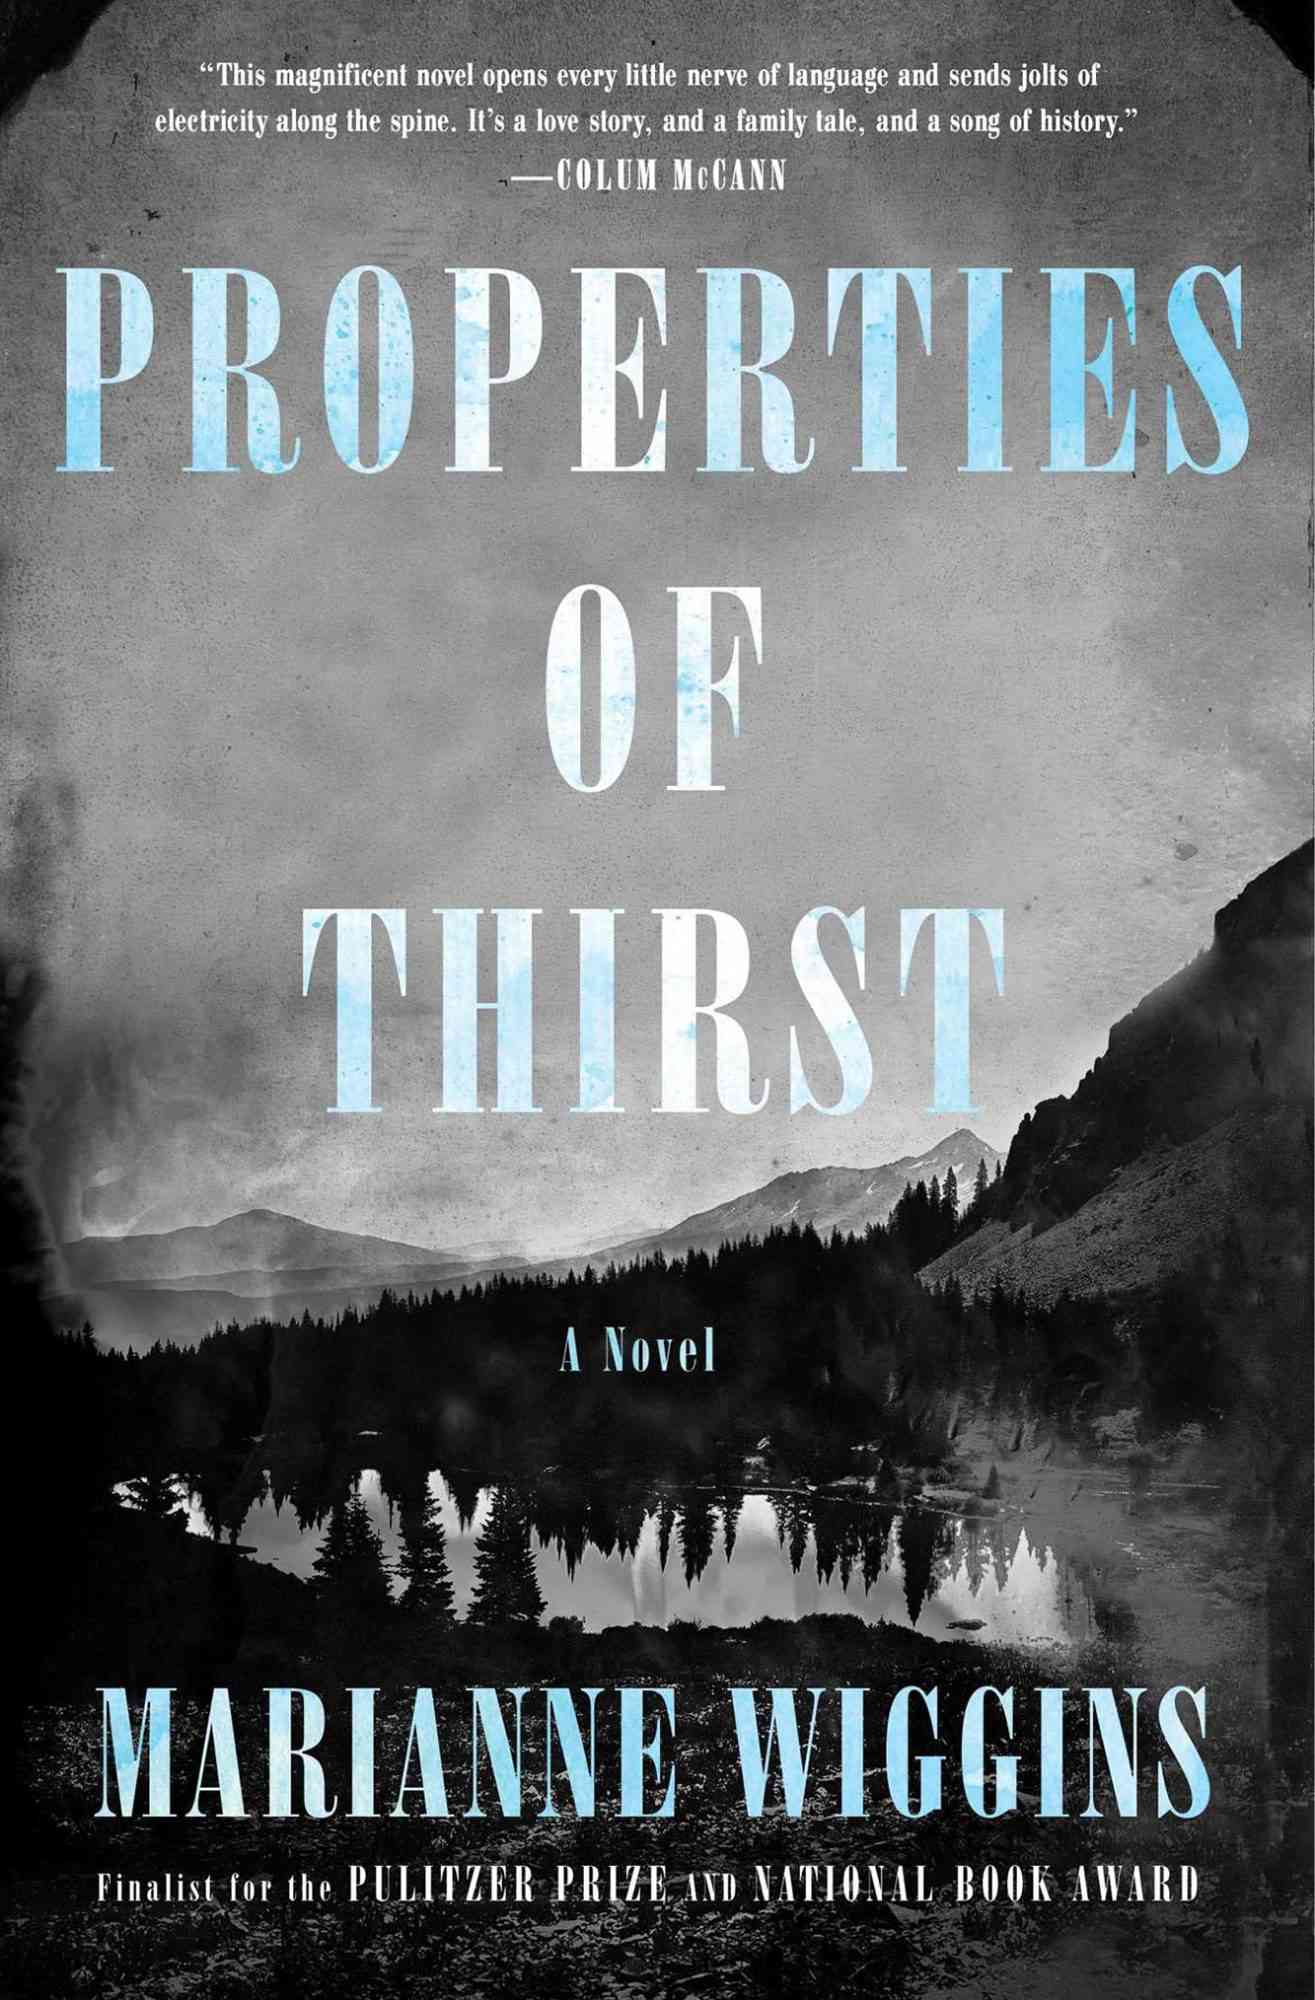 Properties of Thirst, Marianne WigginsPublisher ‏ : ‎ Simon + SchusterMost Anticipated Books of 2022